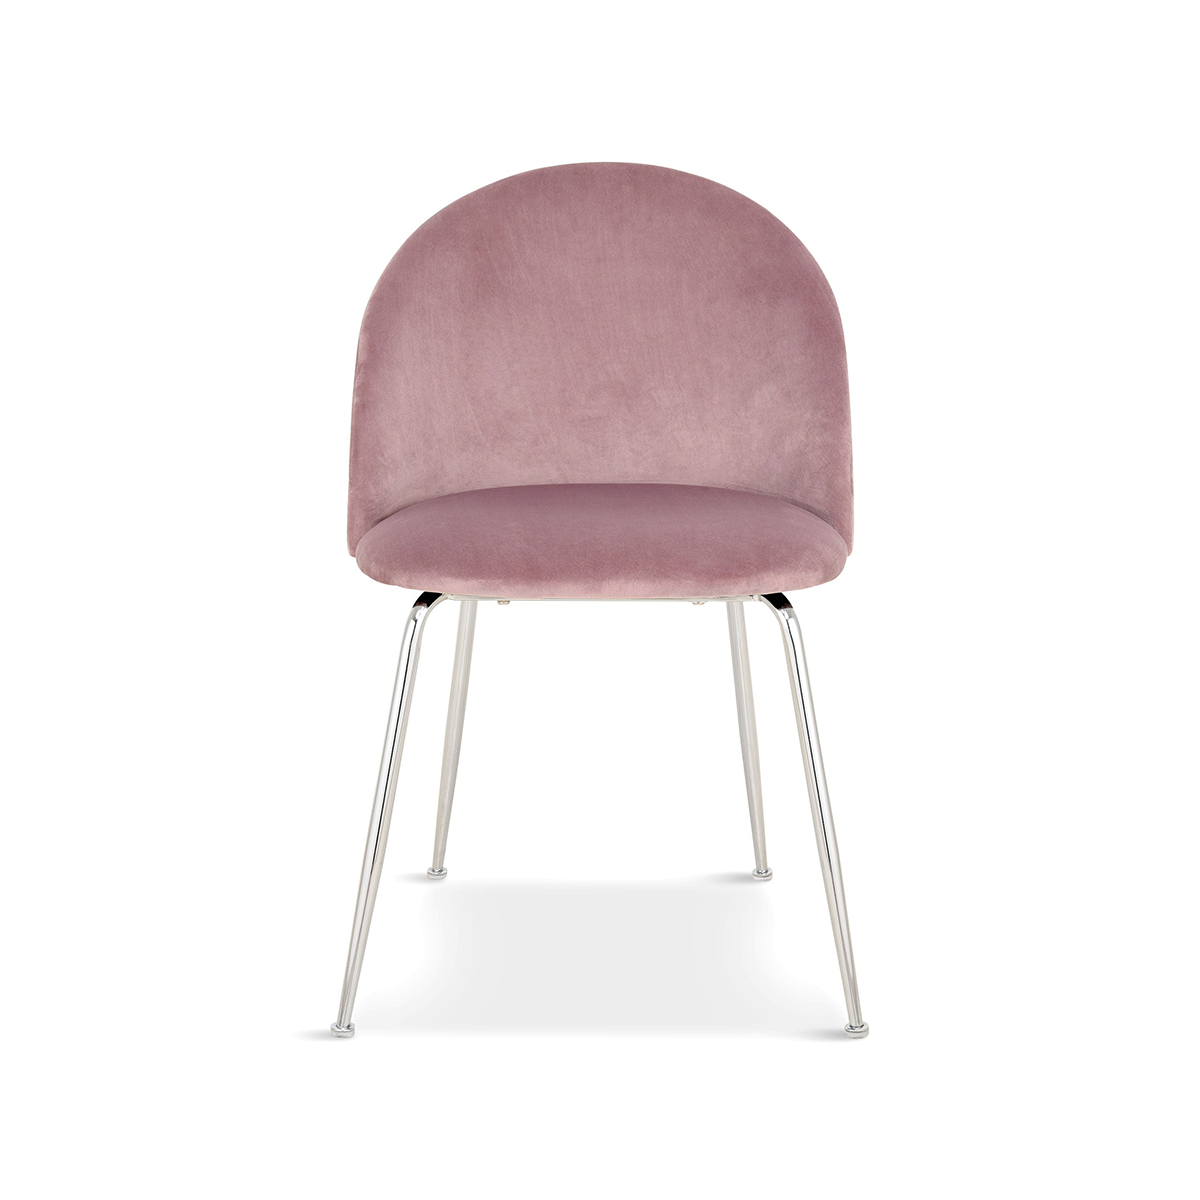 FONDHOUSE Pomuue Dining Chair